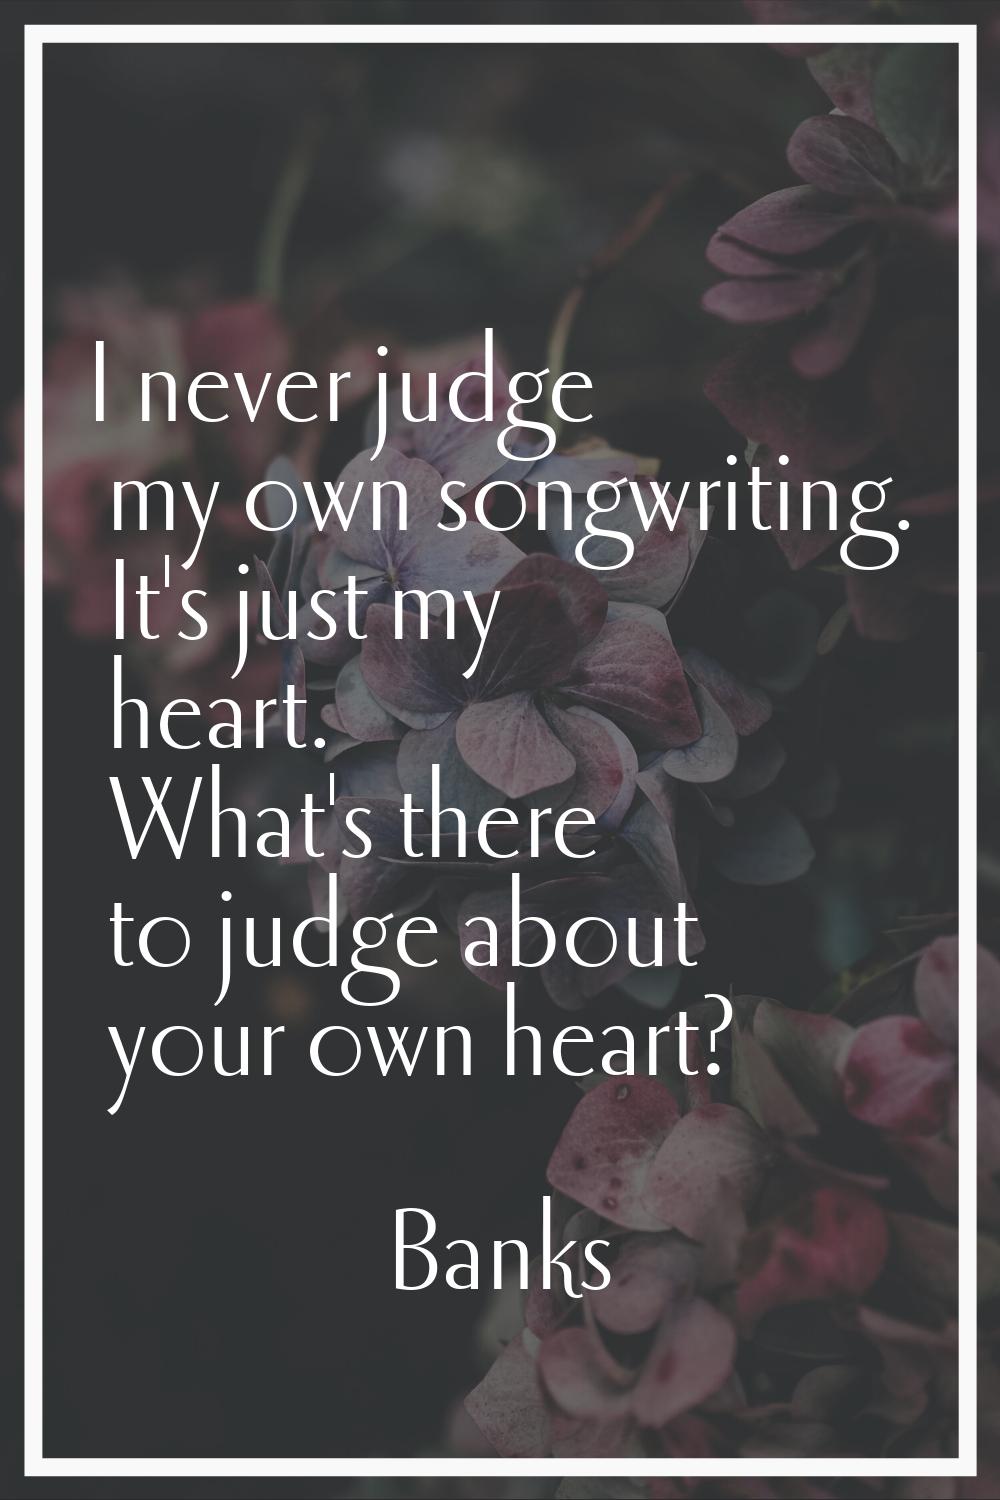 I never judge my own songwriting. It's just my heart. What's there to judge about your own heart?